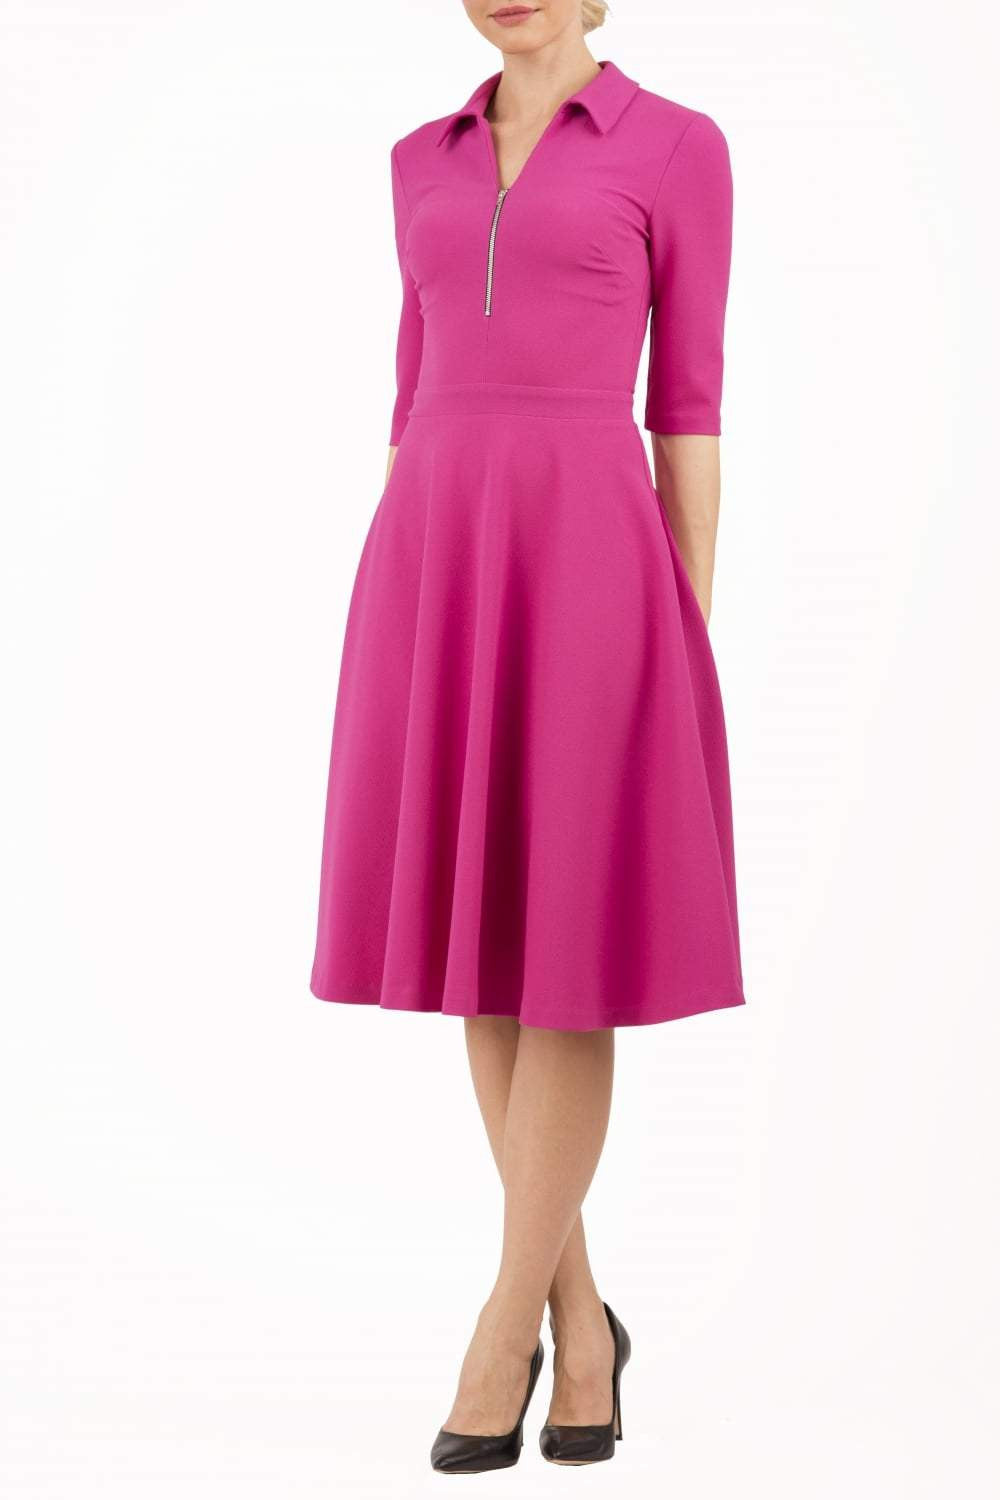 Model wearing the Diva Annette Swing Dress with V shaped neckline with zip detail in fuschia pink front image